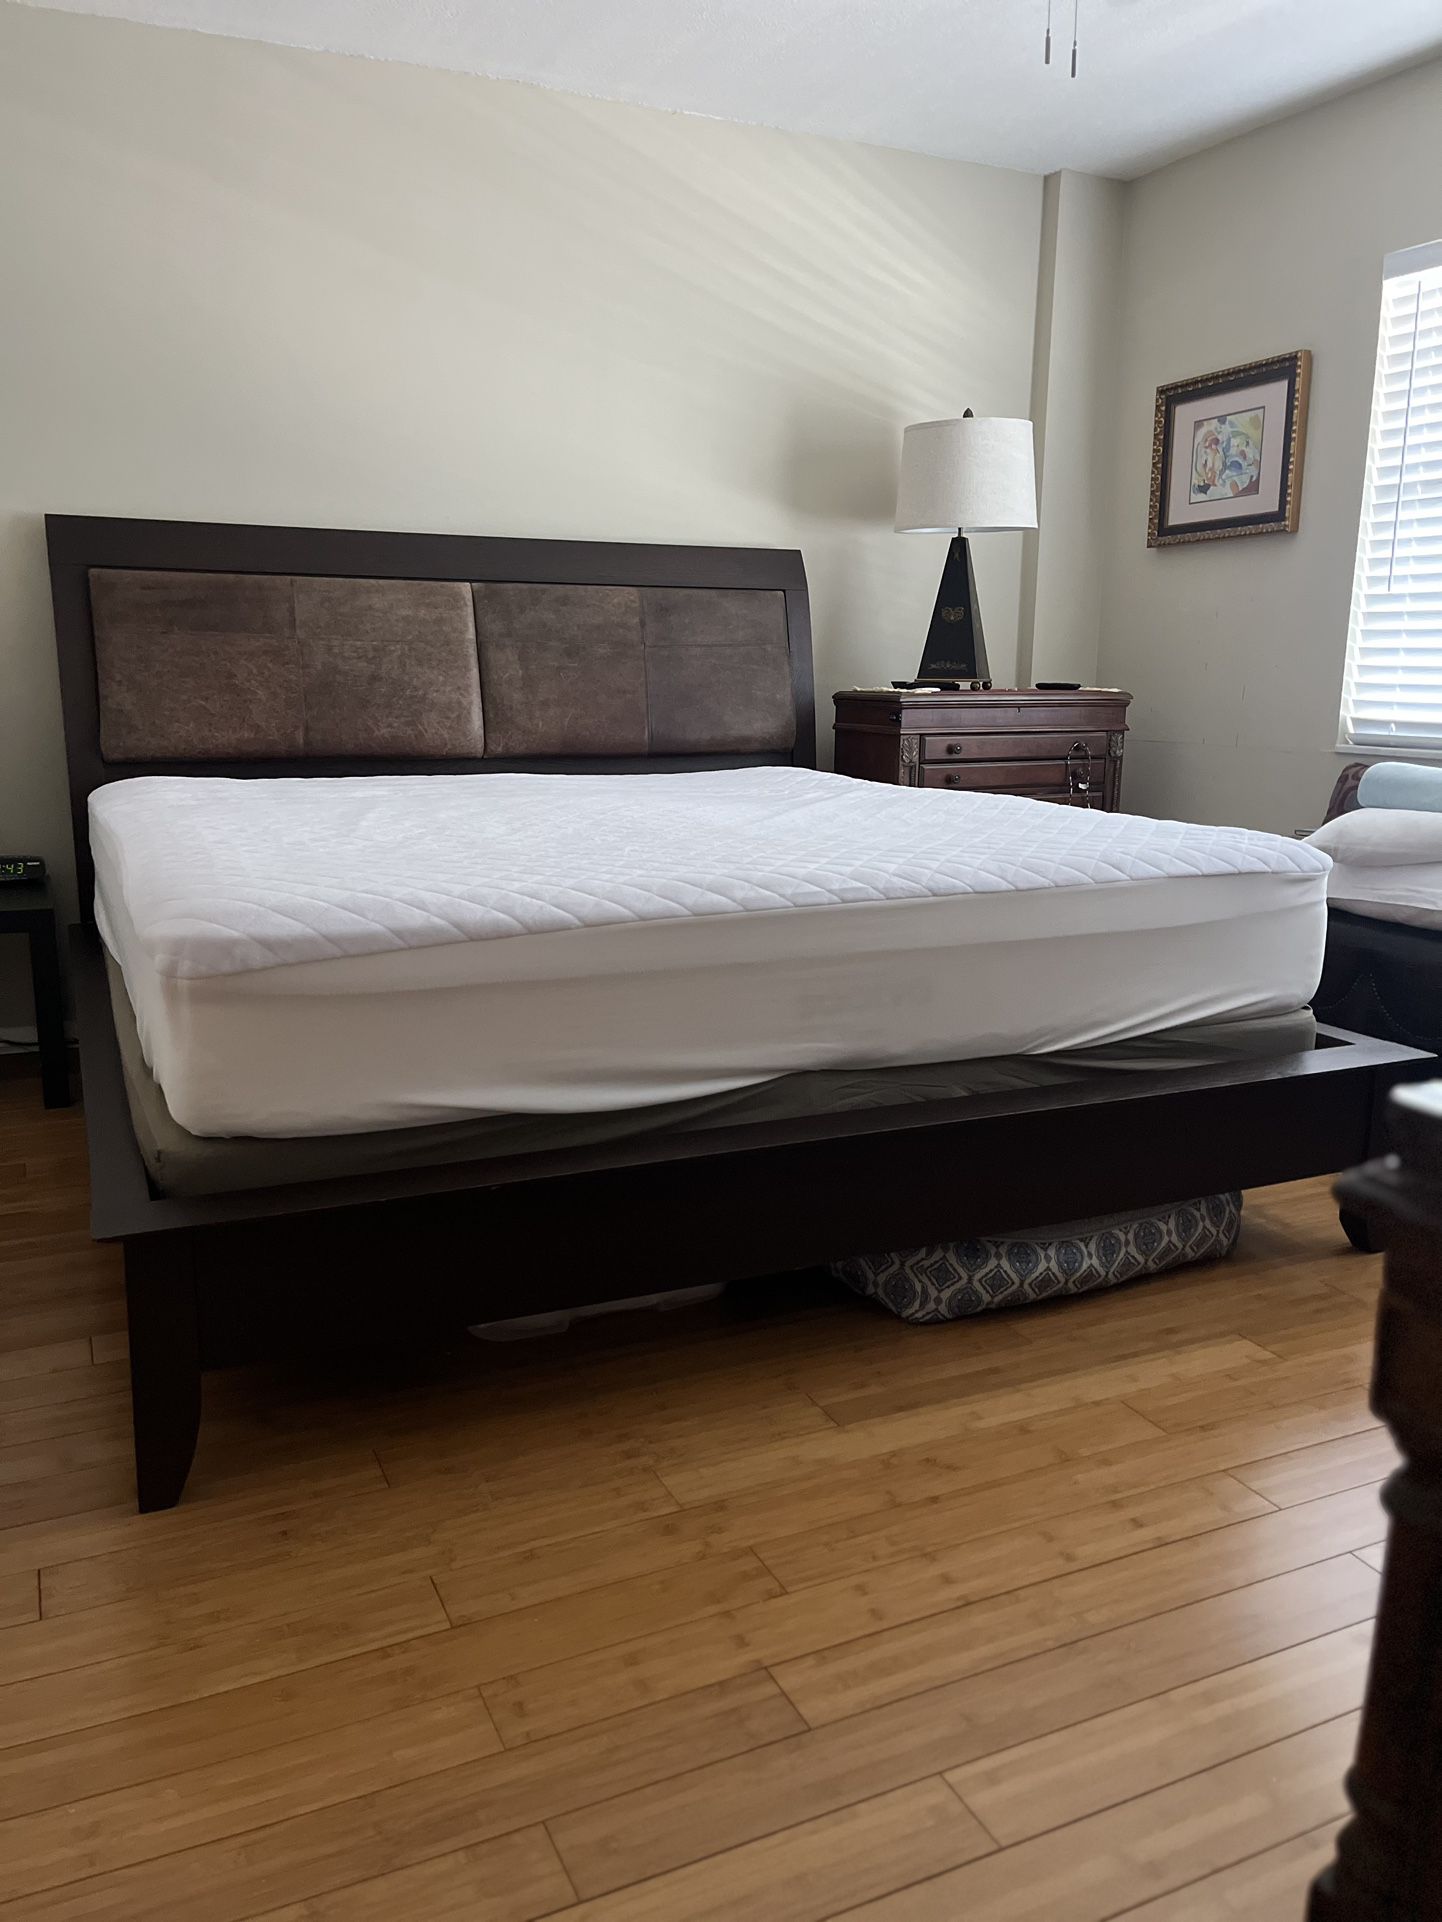 Master King Bed Frame And Spring Box